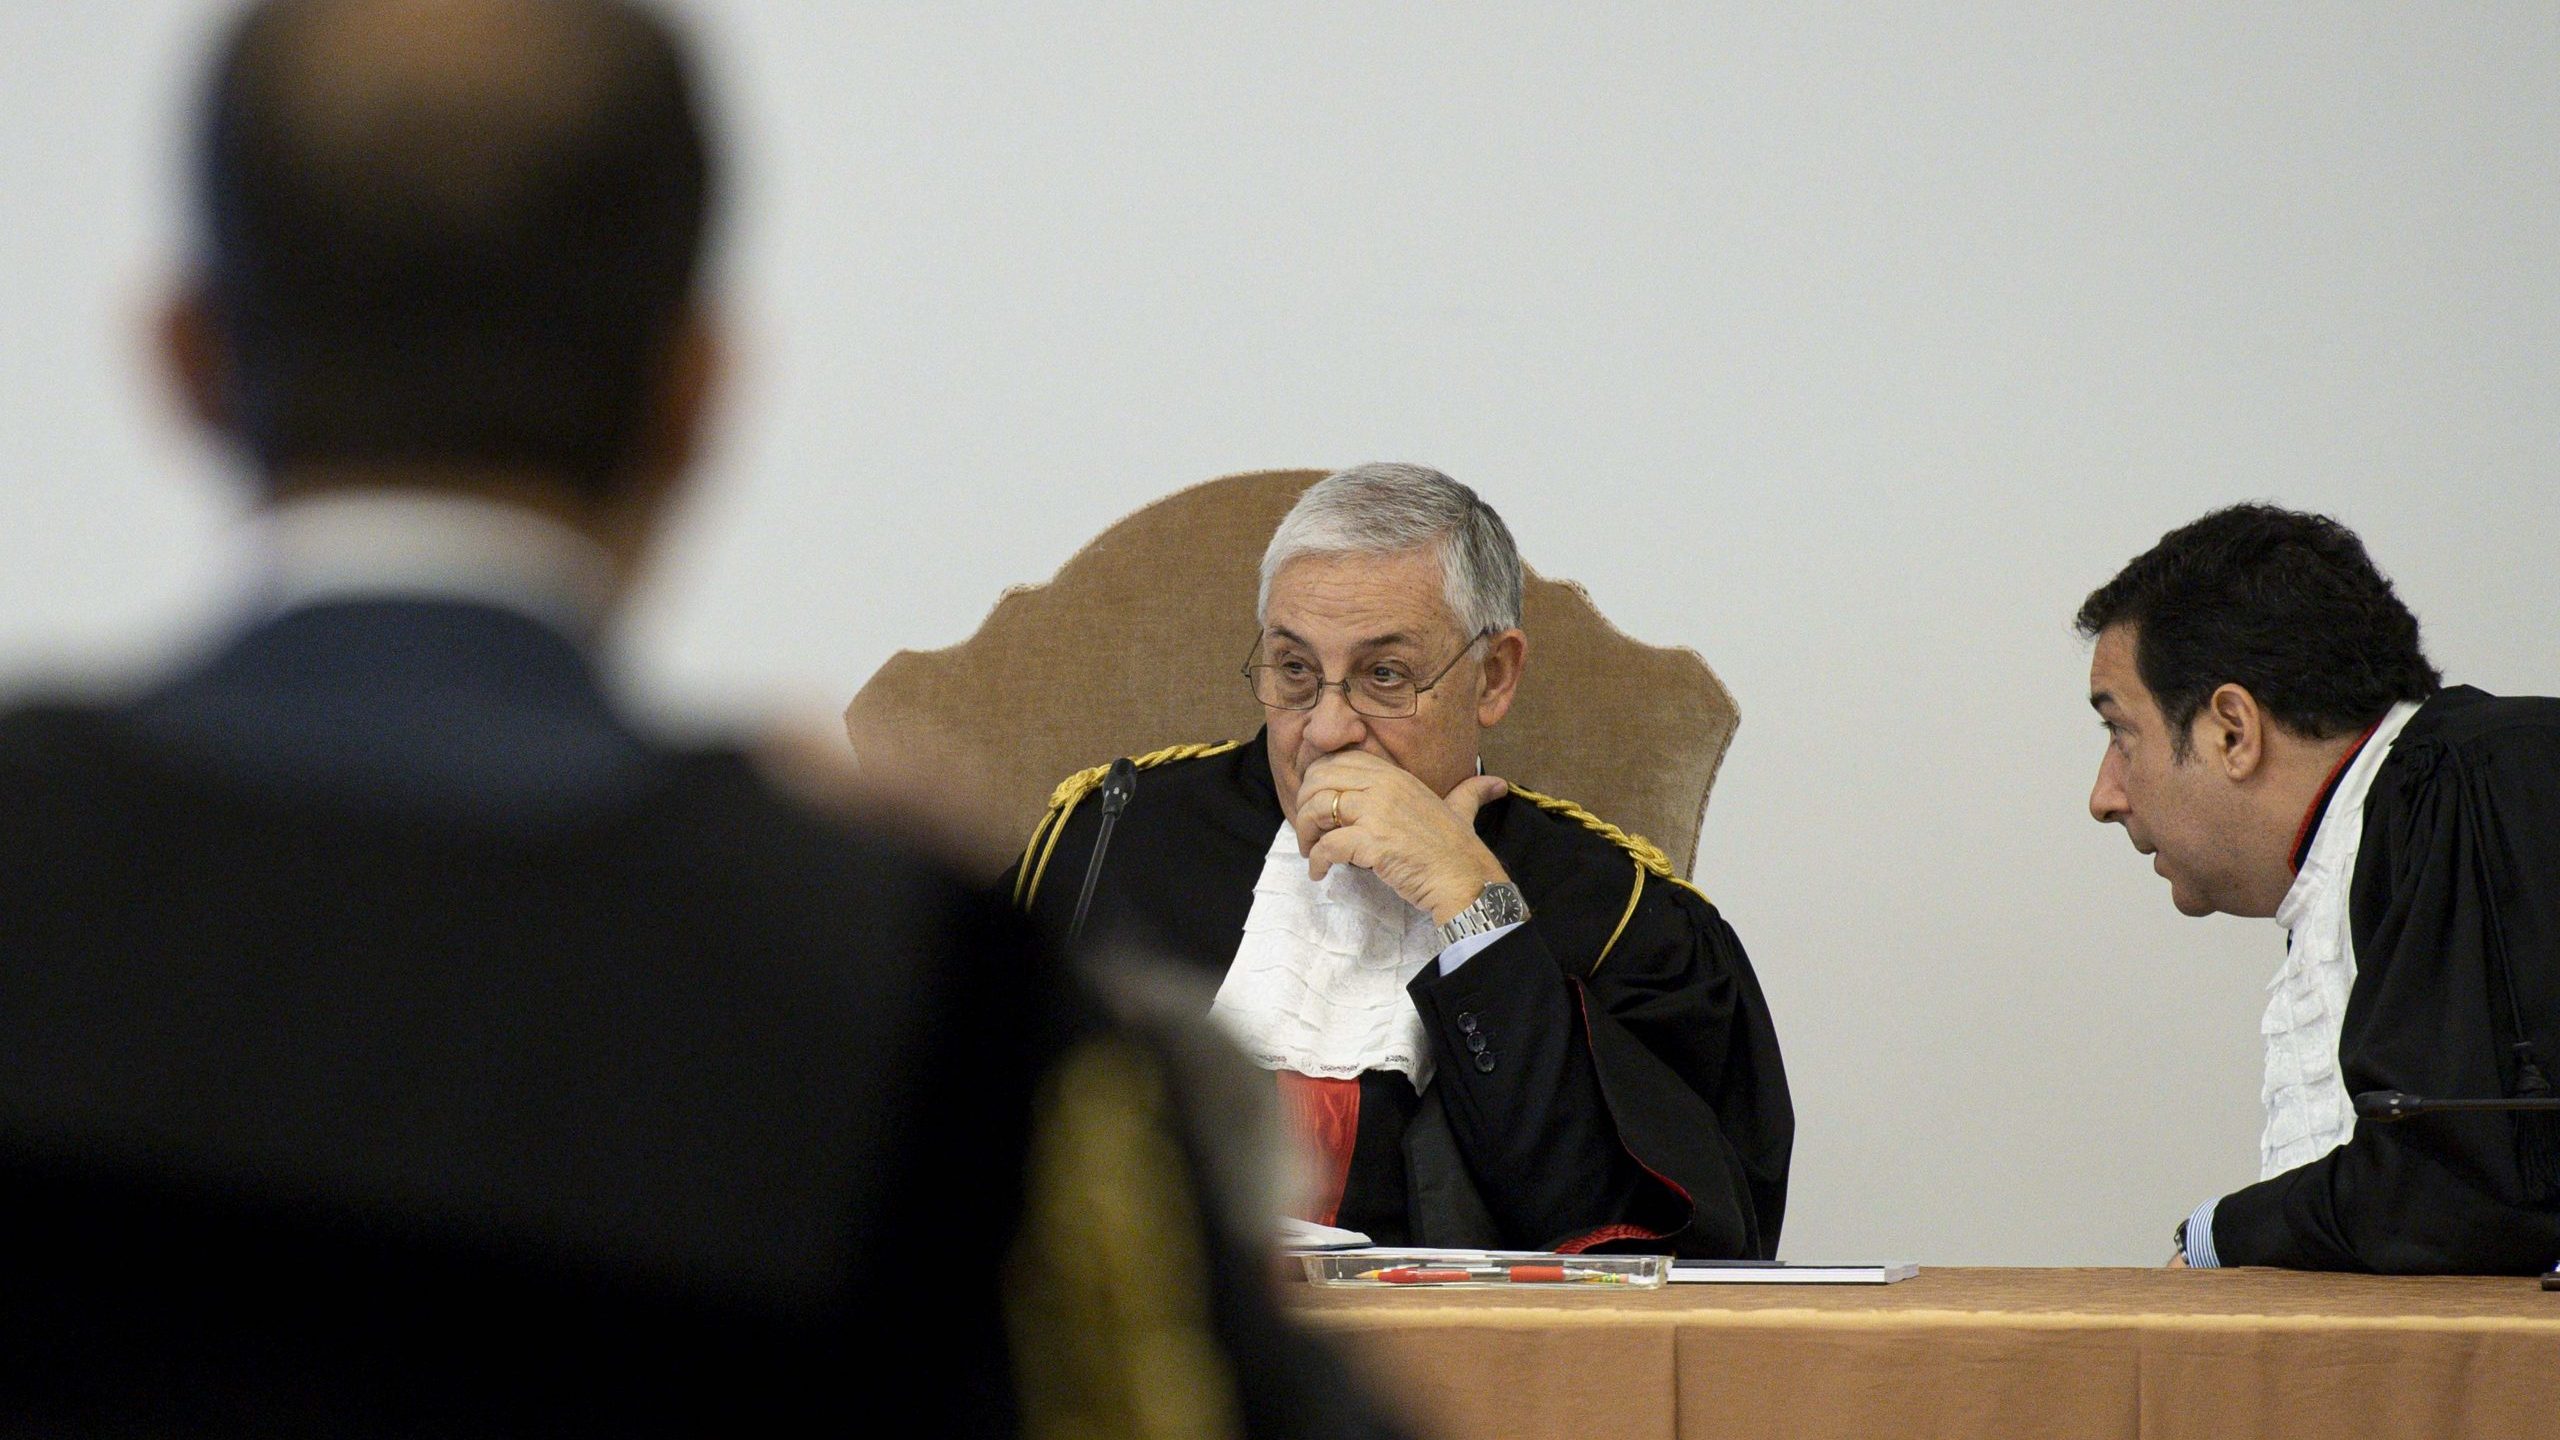 Vatican’s ‘trial of the century’ could end in a whimper, not a bang